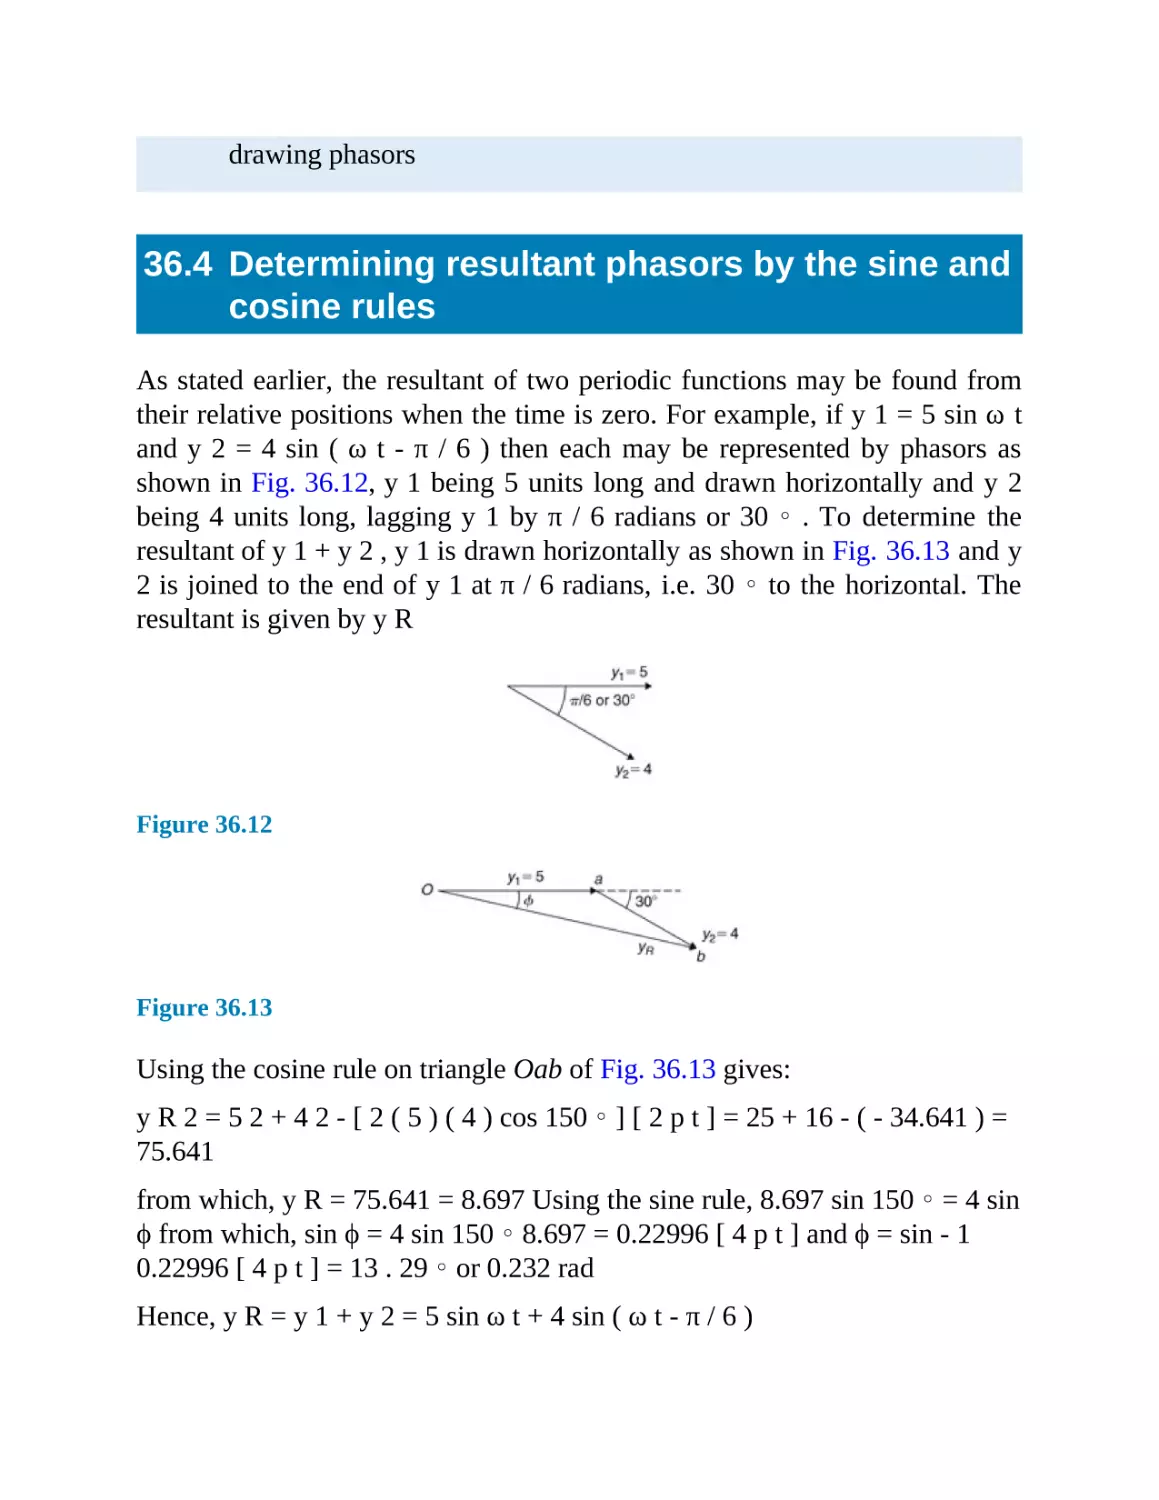 36.4 Determining resultant phasors by the sine and cosine rules